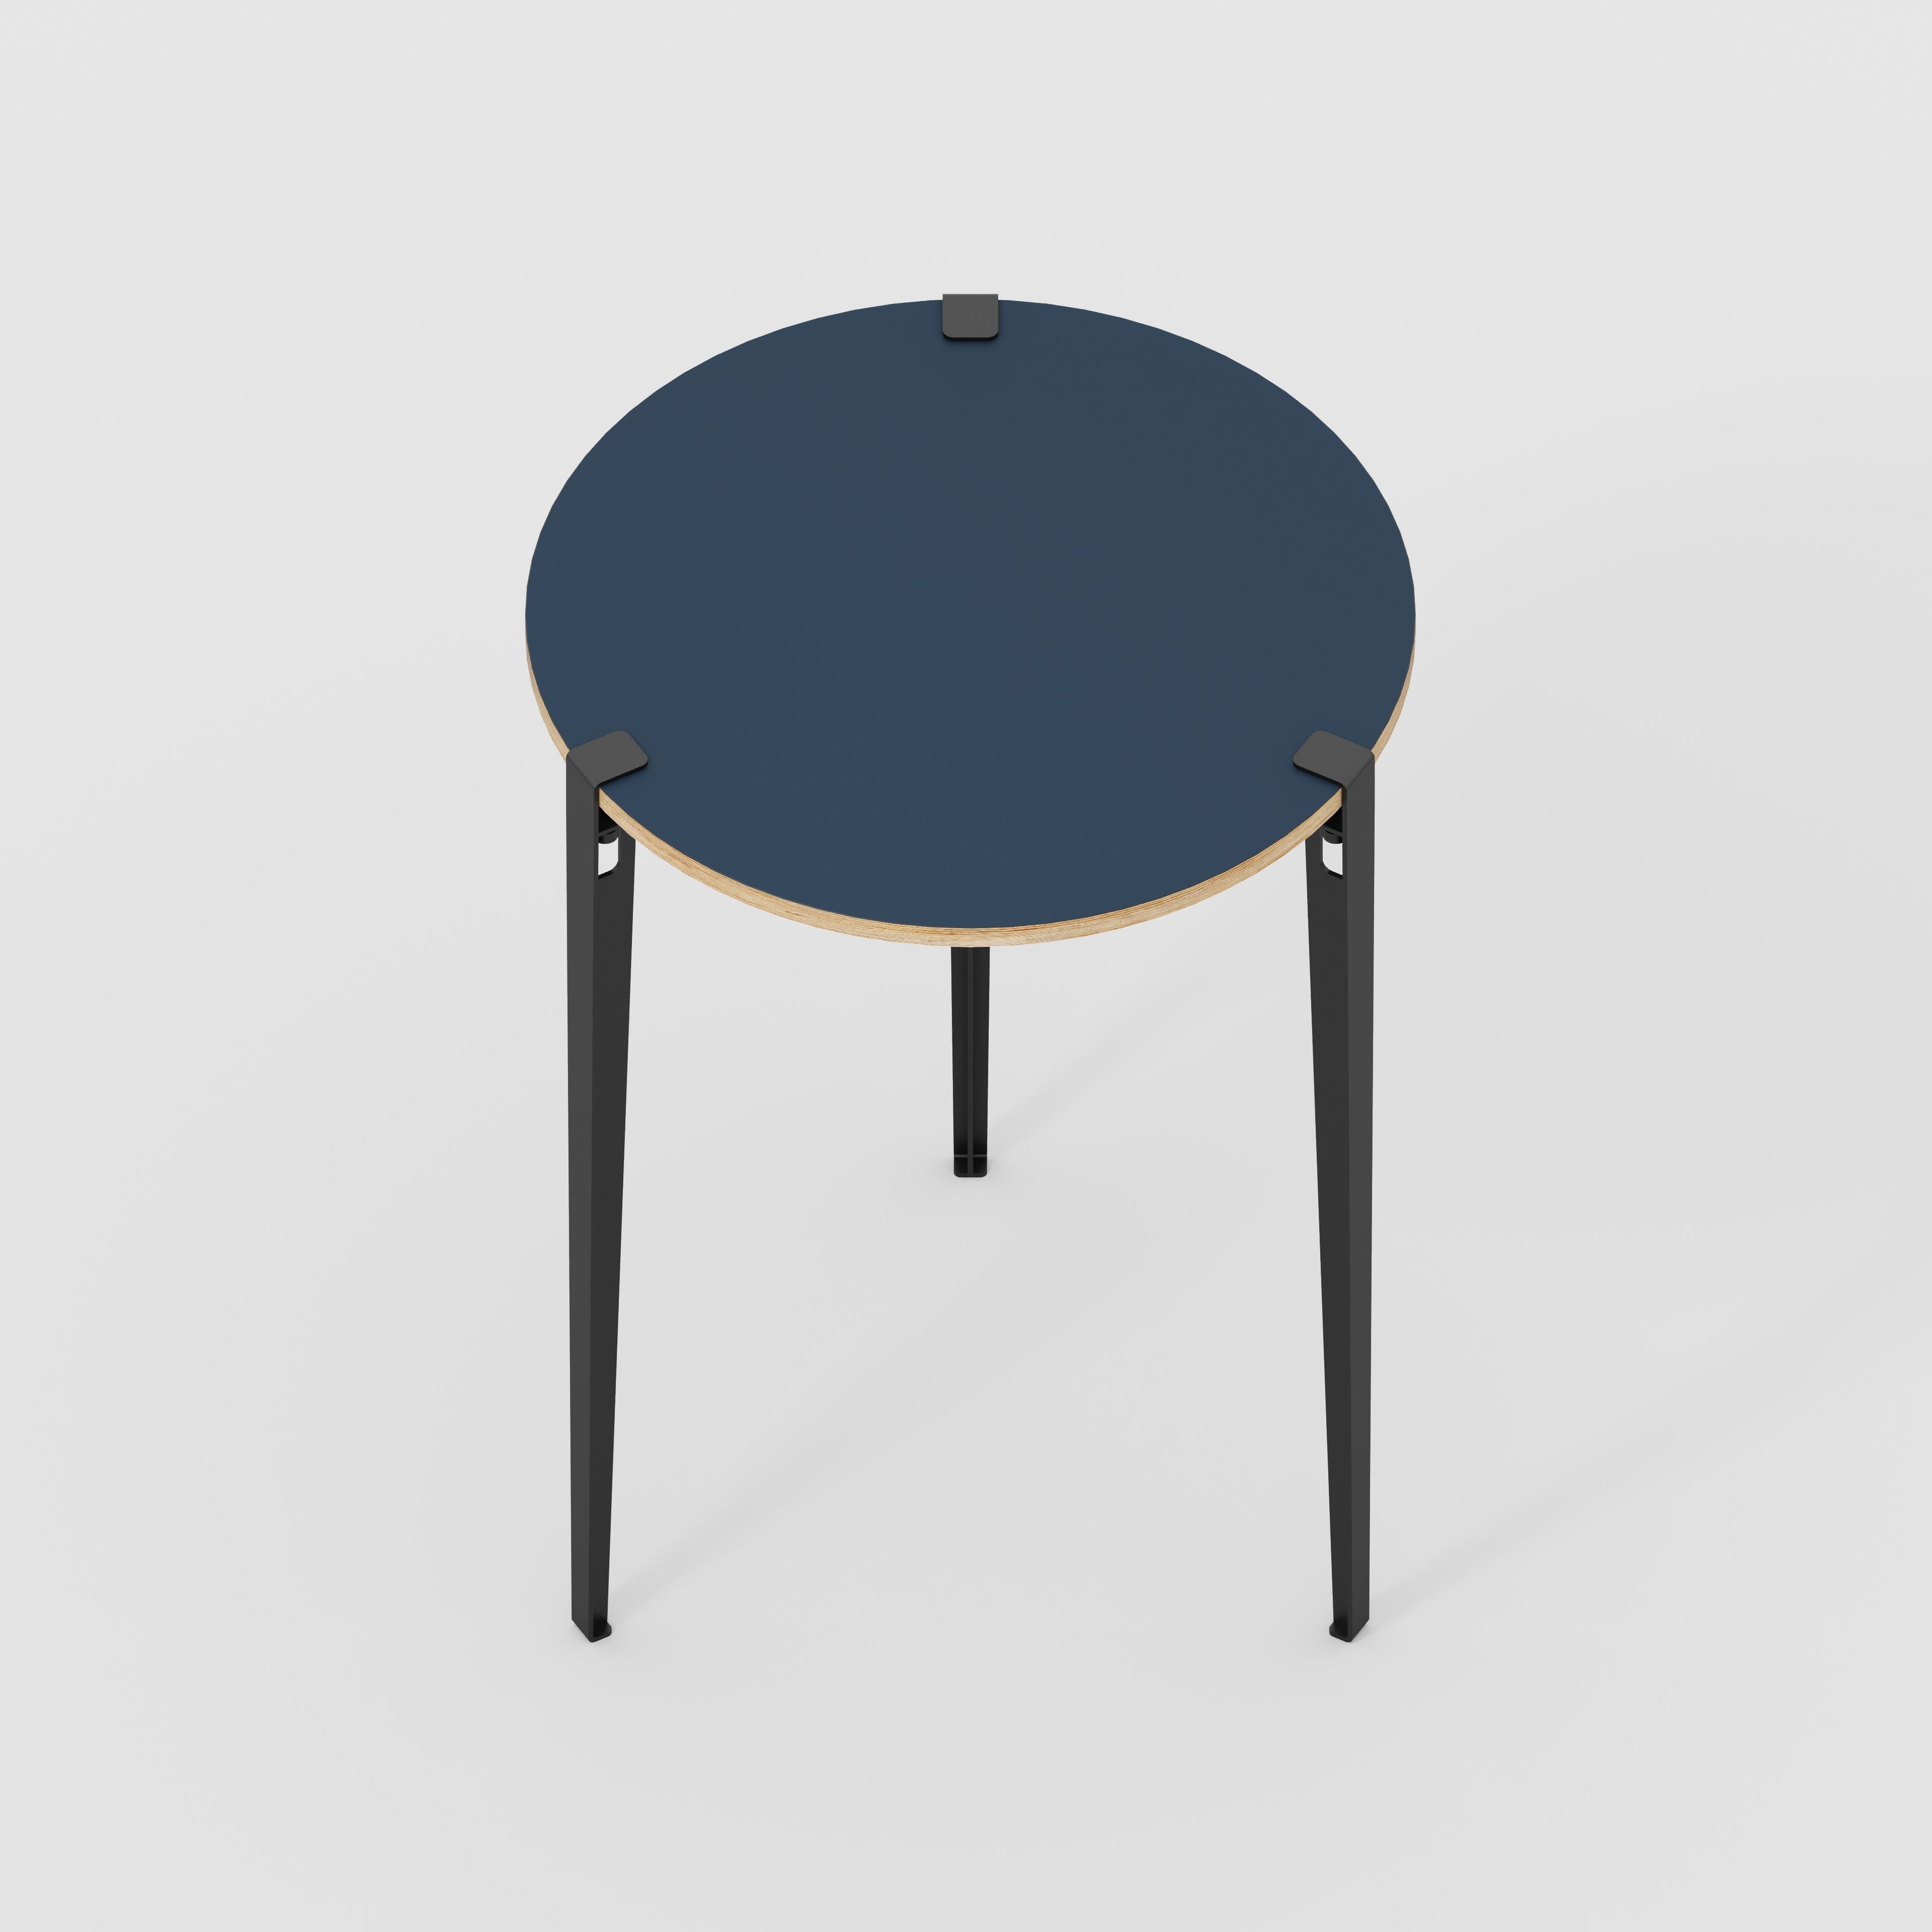 Round Table with Black Tiptoe Legs - Formica Night Sea Blue - 800(dia) x 1100(h)